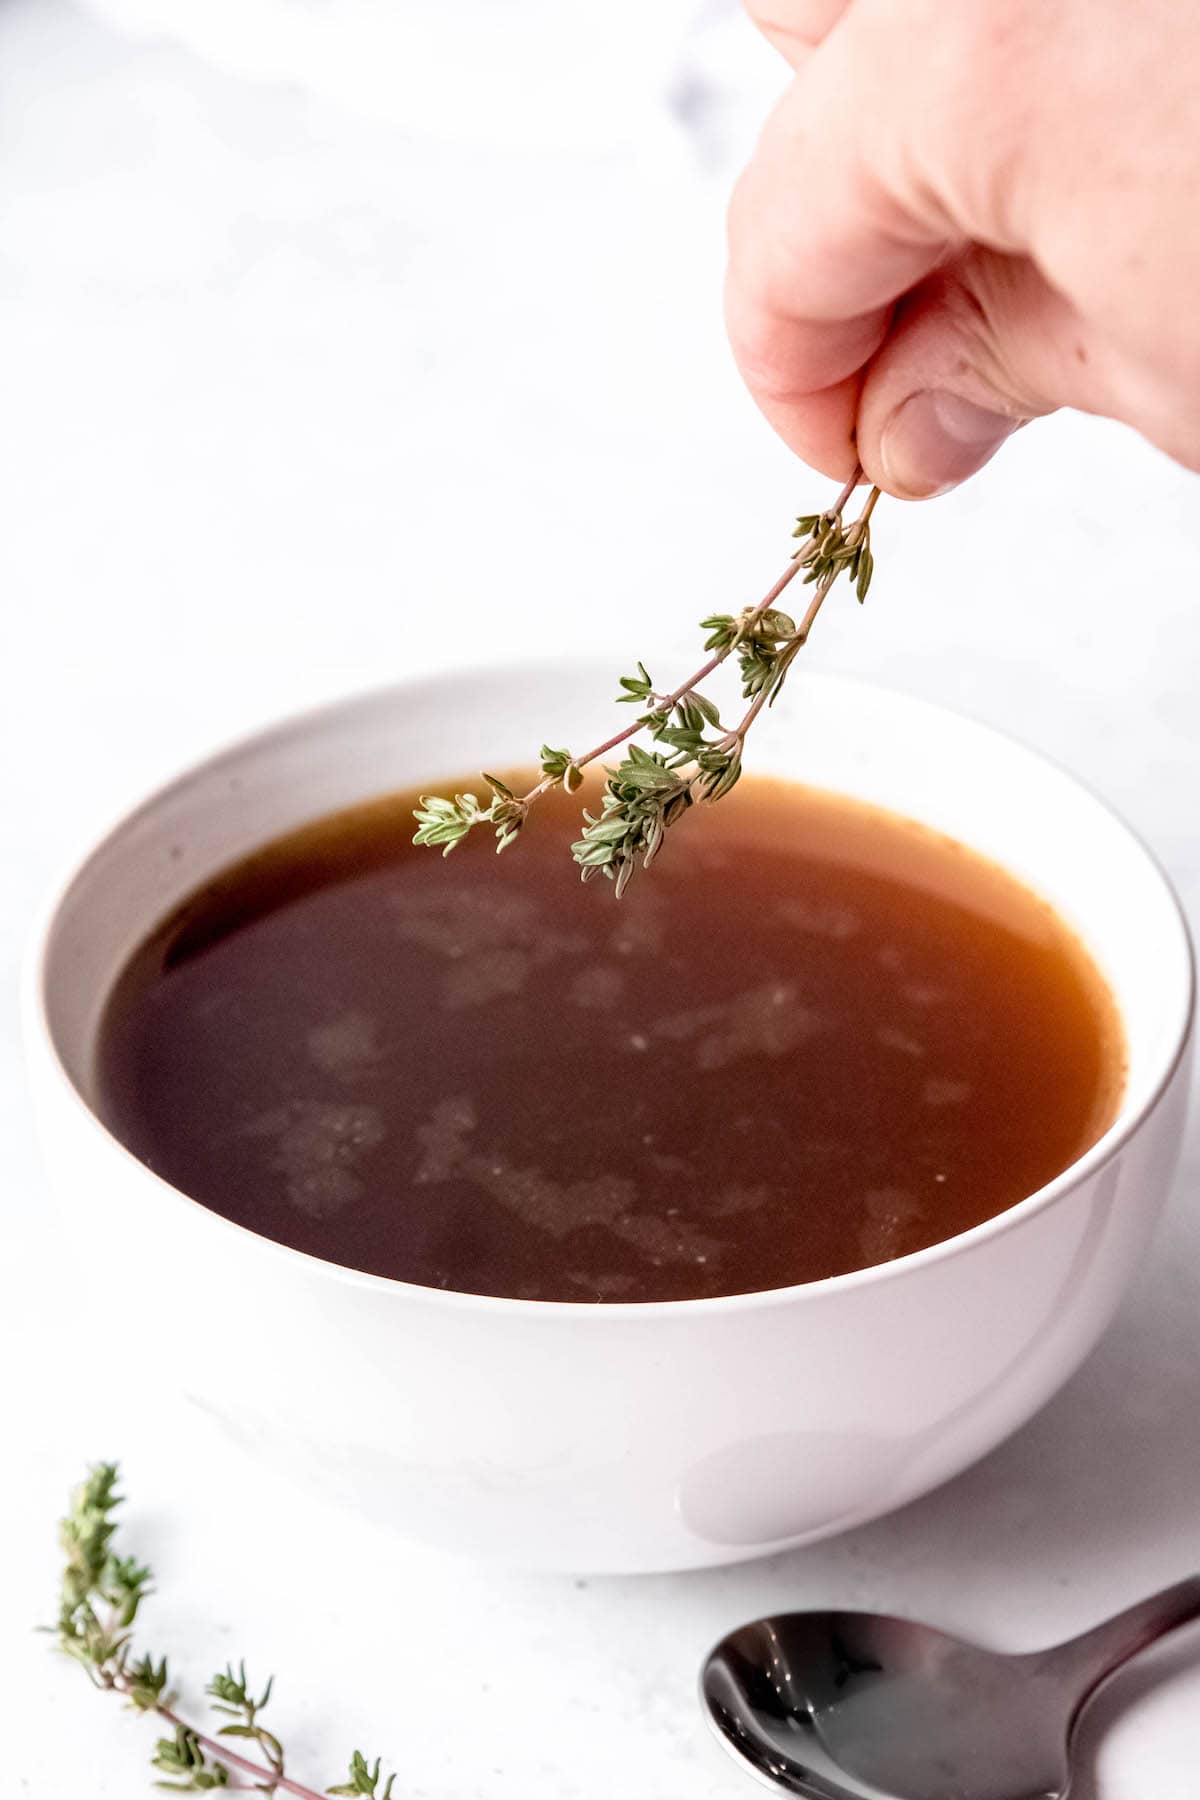 hand adding a sprig of fresh thyme to a bowl of roasted bone broth for serving like consomme.